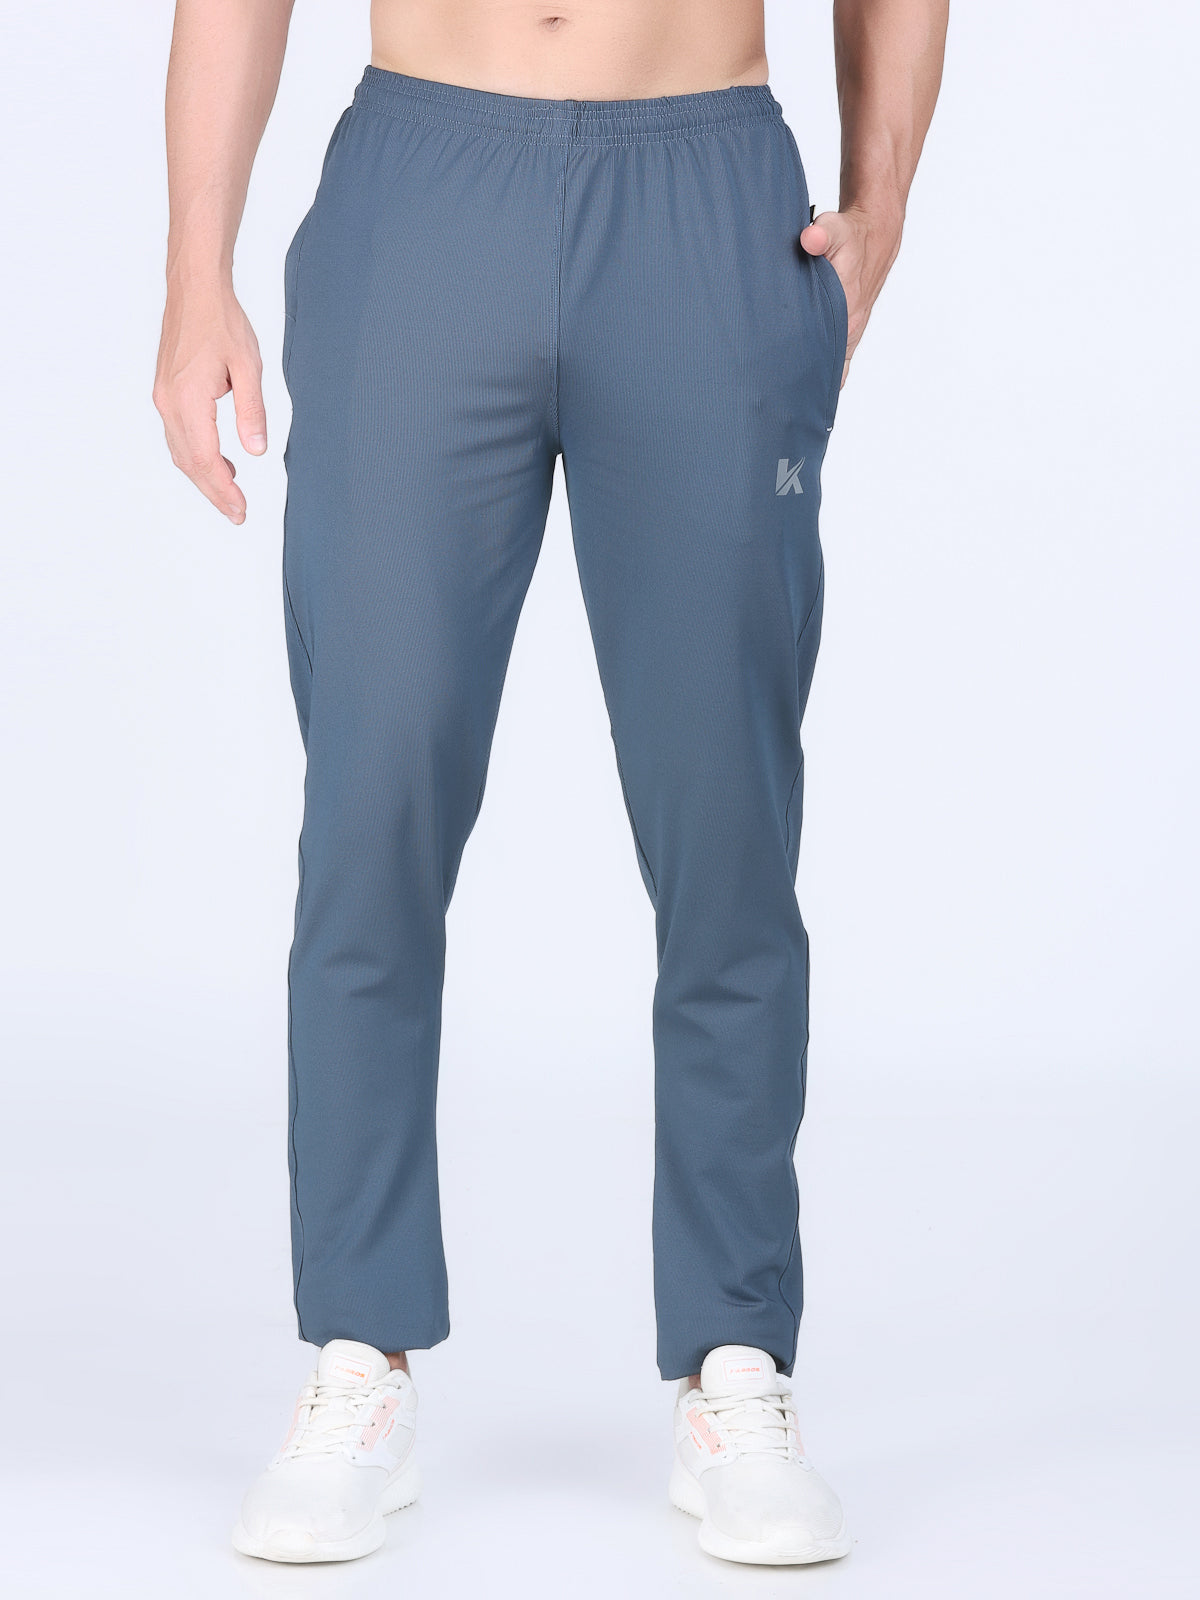 Combo of 2 Men's 4 Way Stretch Lining Silver and DarkGrey Track Pant